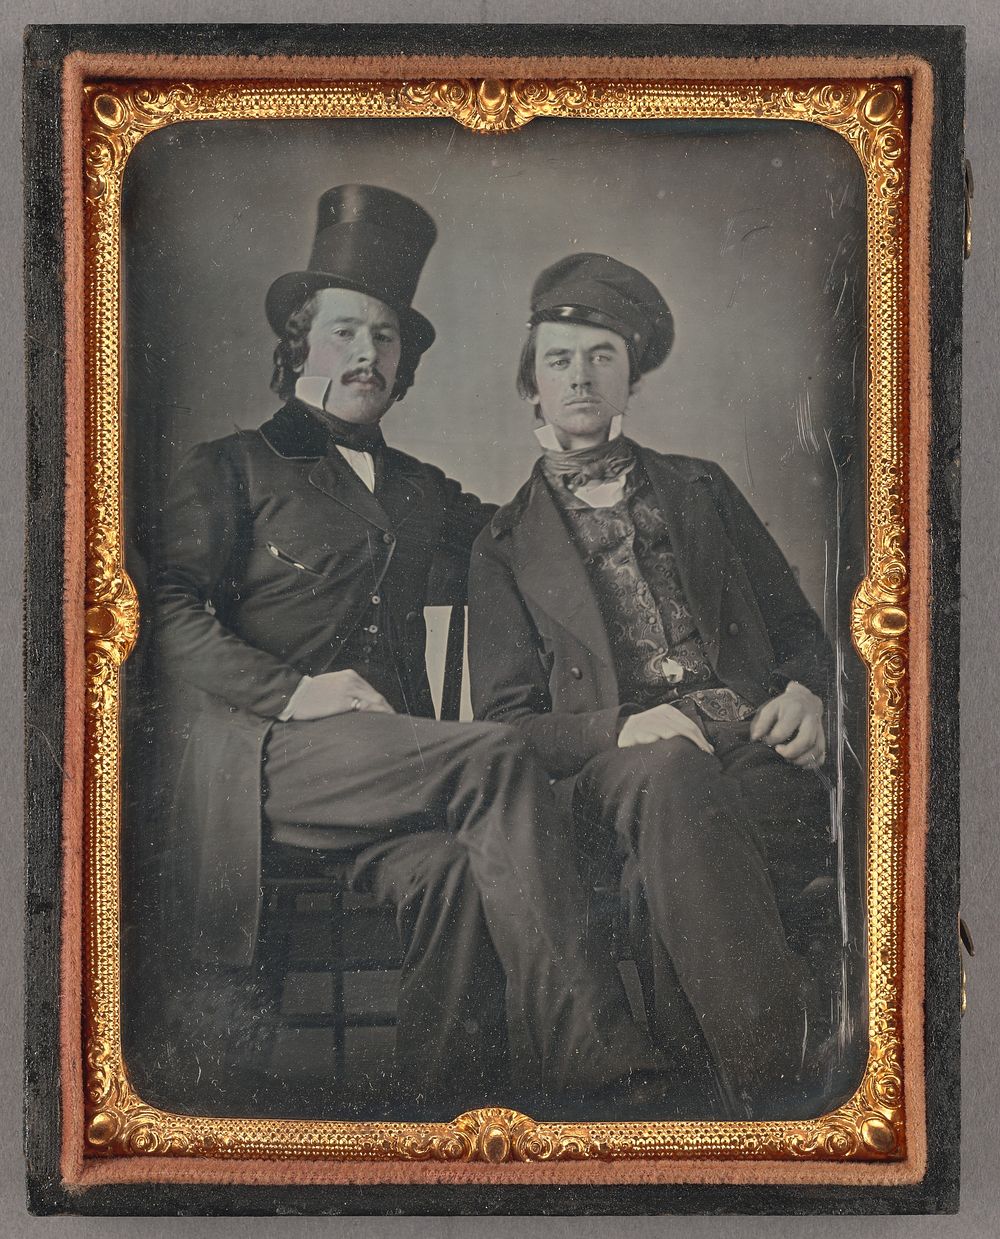 Portrait of Seated Two Men, One in Top Hat, Another in Cap